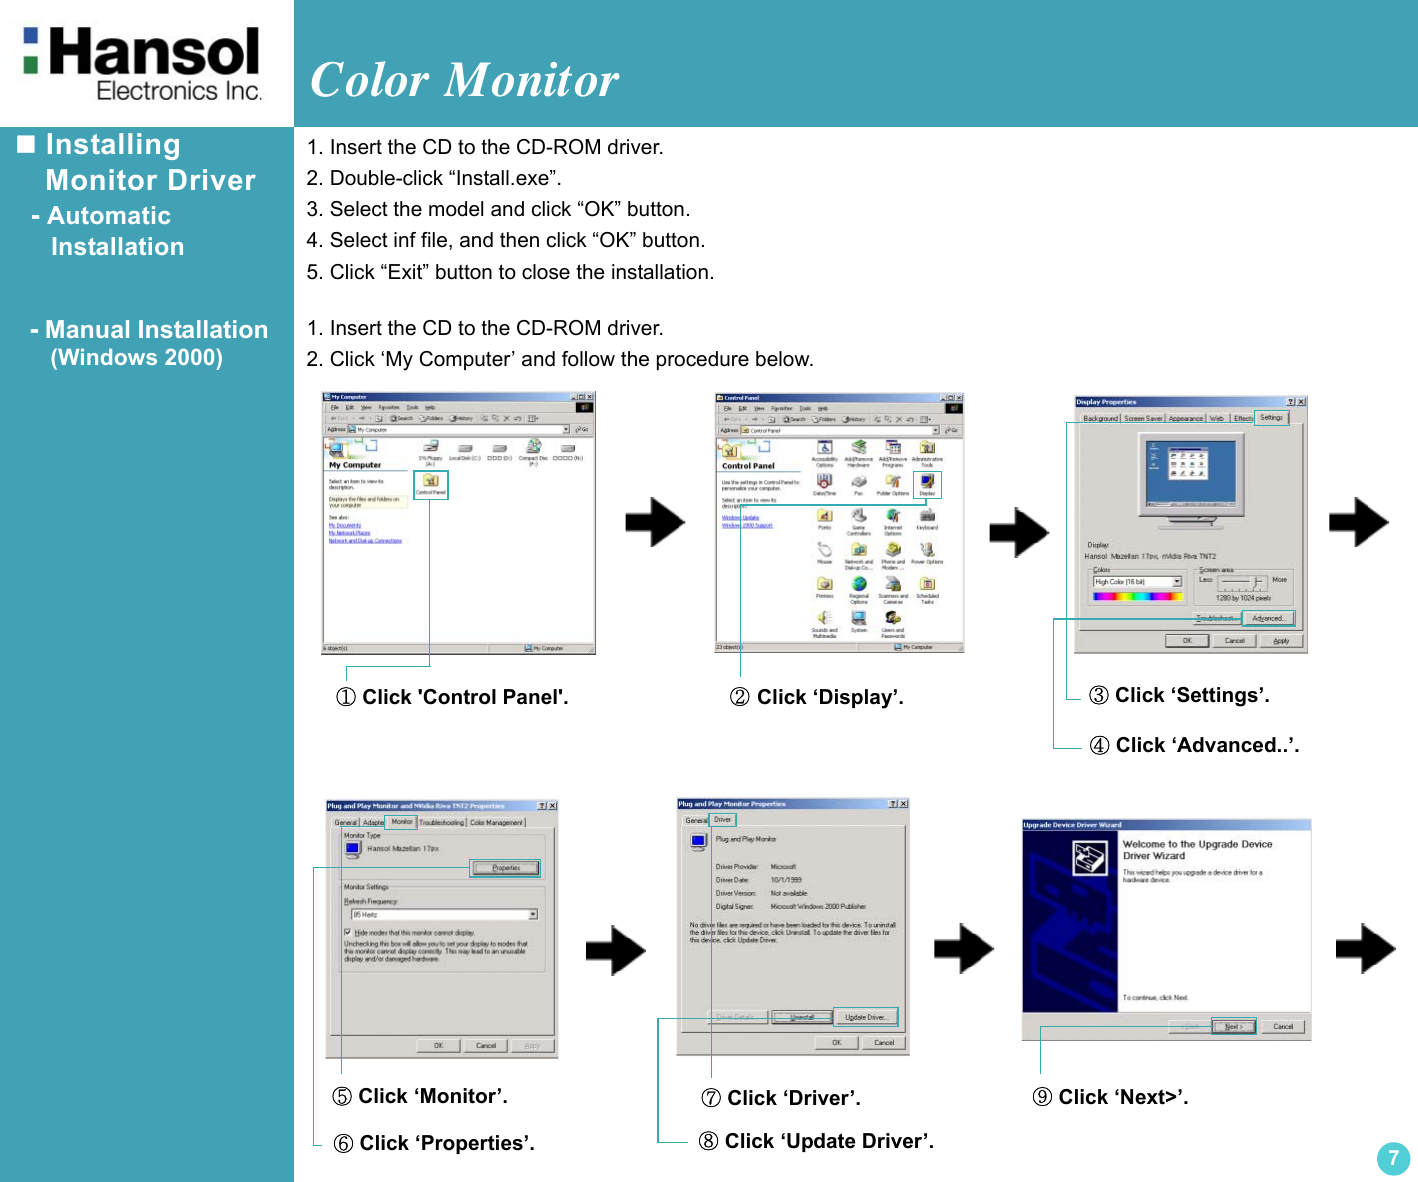 Color Monitor 7 Installing     Monitor Driver  - Automatic      Installation  - Manual Installation(Windows 2000)1. Insert the CD to the CD-ROM driver.2. Double-click “Install.exe”.3. Select the model and click “OK” button.4. Select inf file, and then click “OK” button.5. Click “Exit” button to close the installation.1. Insert the CD to the CD-ROM driver.2. Click ‘My Computer’ and follow the procedure below.① Click &apos;Control Panel&apos;. ② Click ‘Display’. ③ Click ‘Settings’.④ Click ‘Advanced..’.⑦ Click ‘Driver’.⑧ Click ‘Update Driver’.⑨ Click ‘Next&gt;’.⑤ Click ‘Monitor’.⑥ Click ‘Properties’.